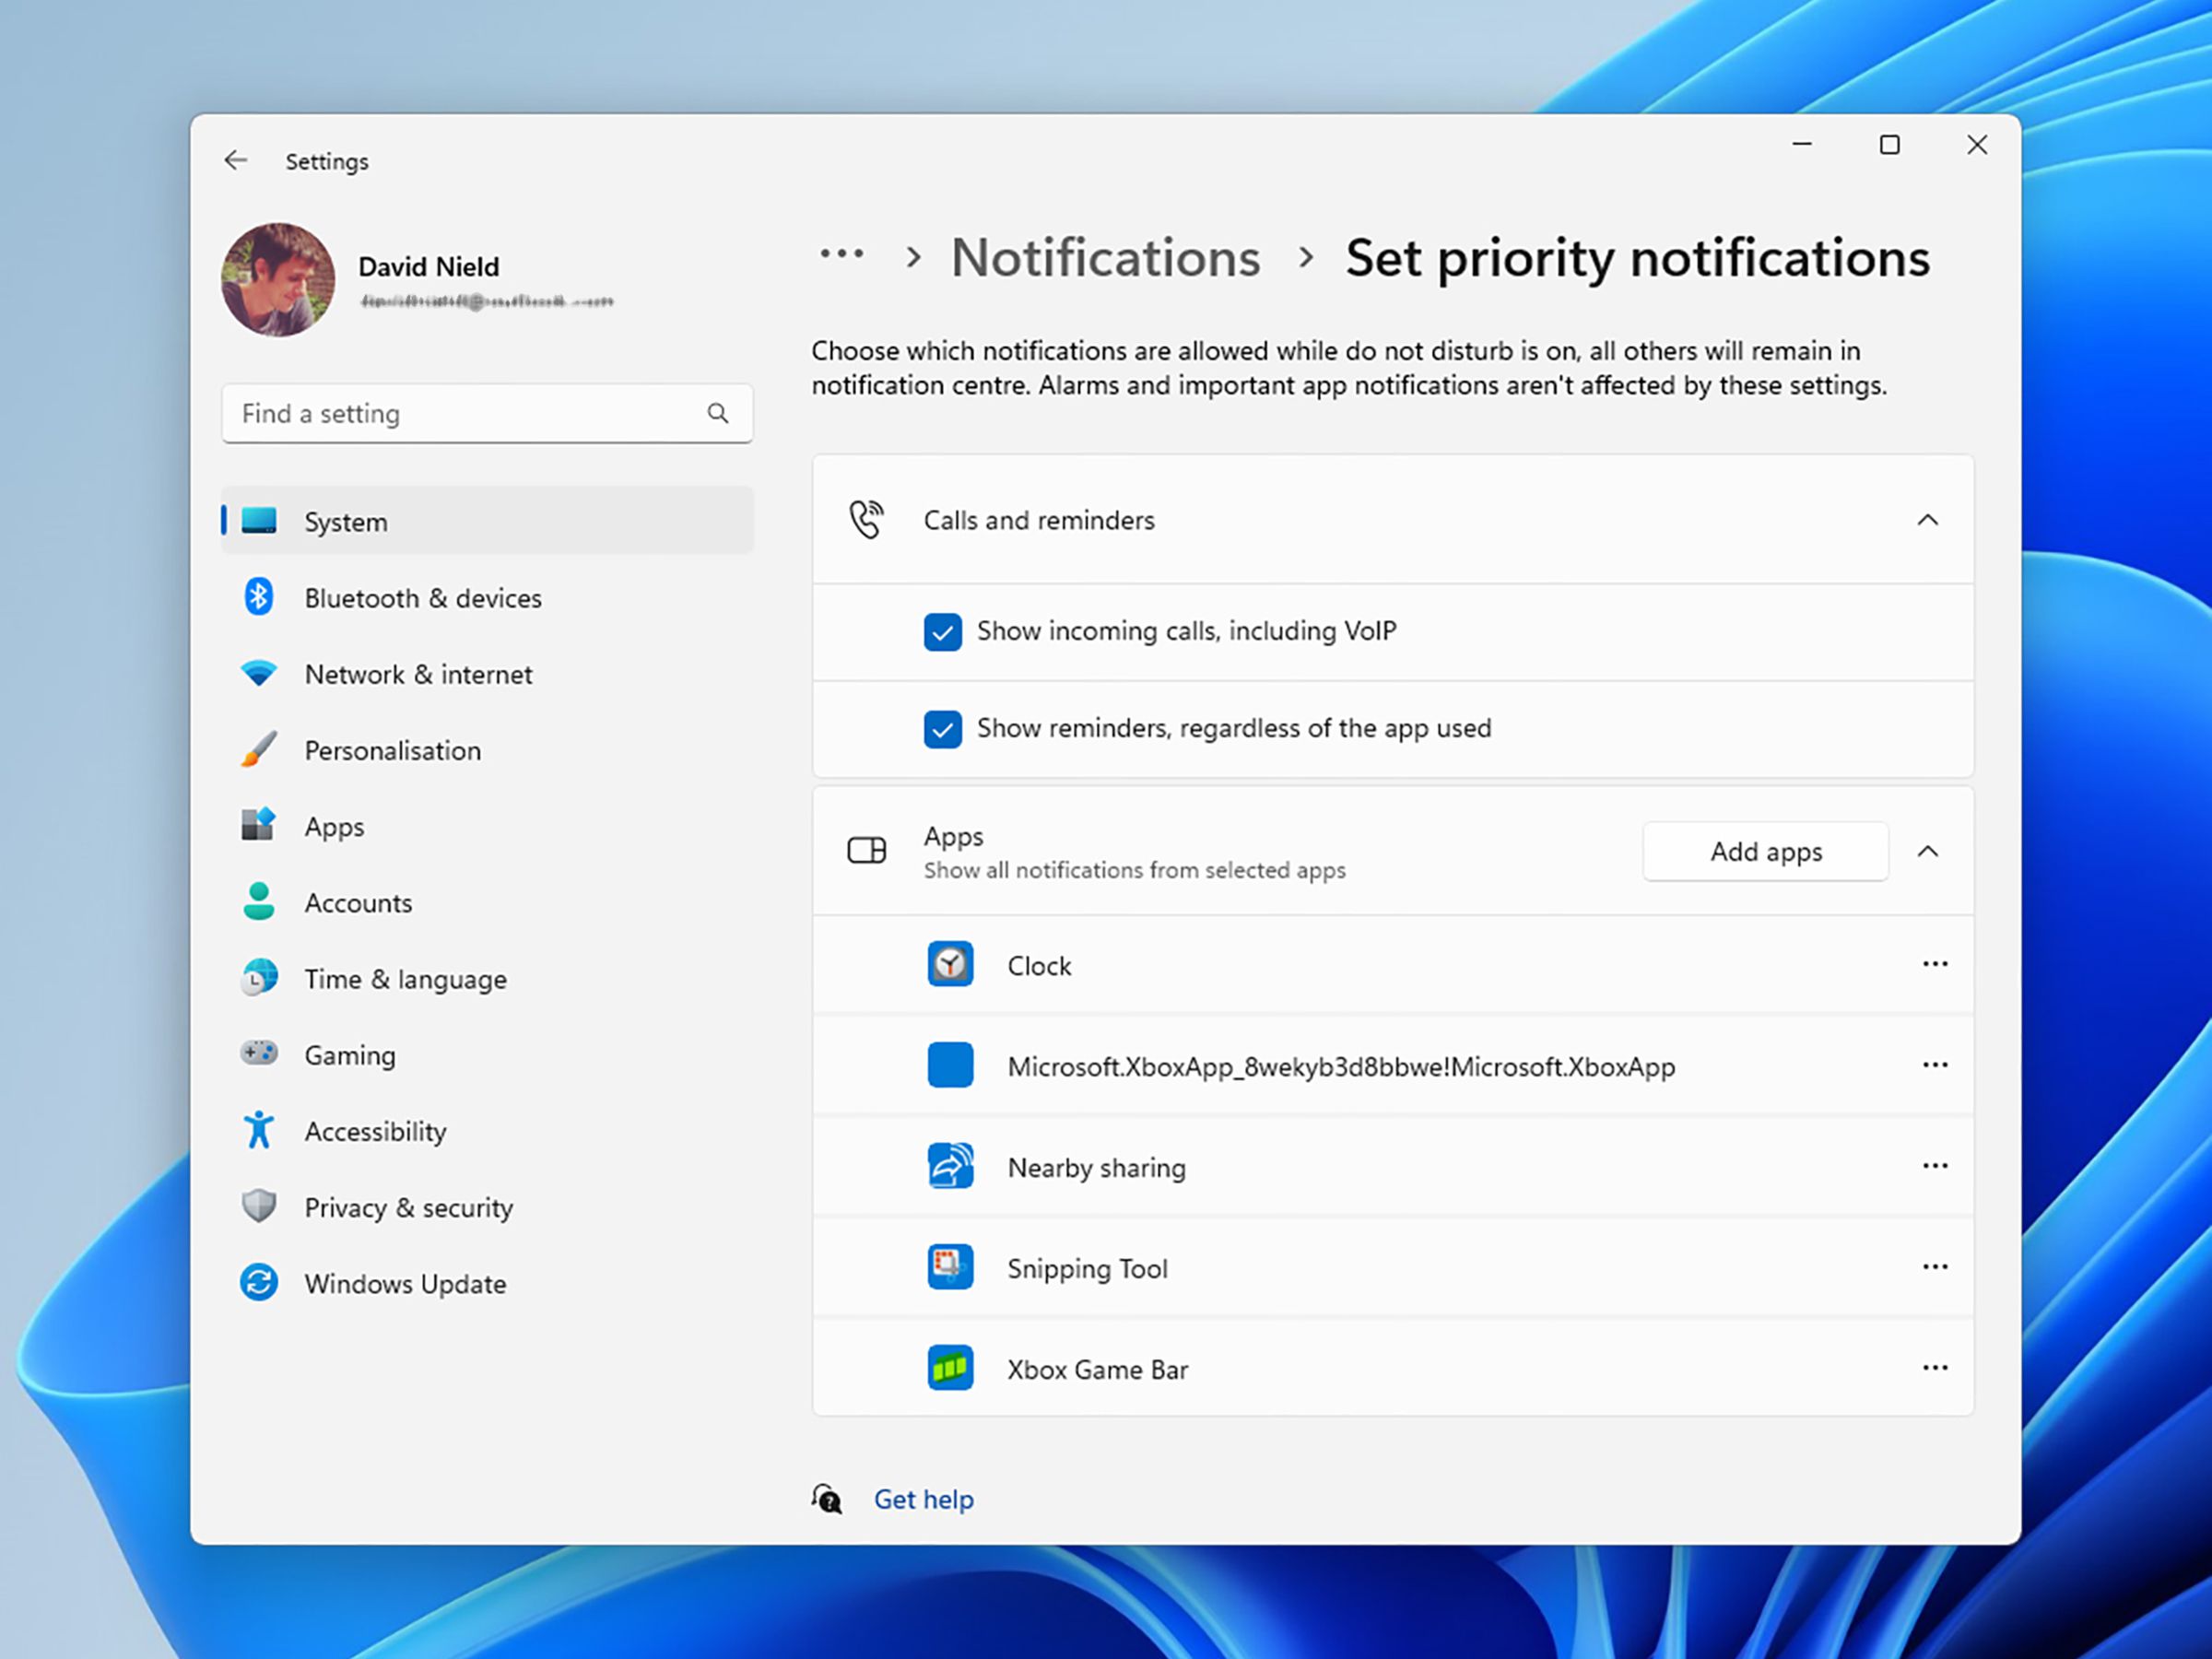 Notifications  > Set priority notifications page with settings for Calls and reminders and for Apps